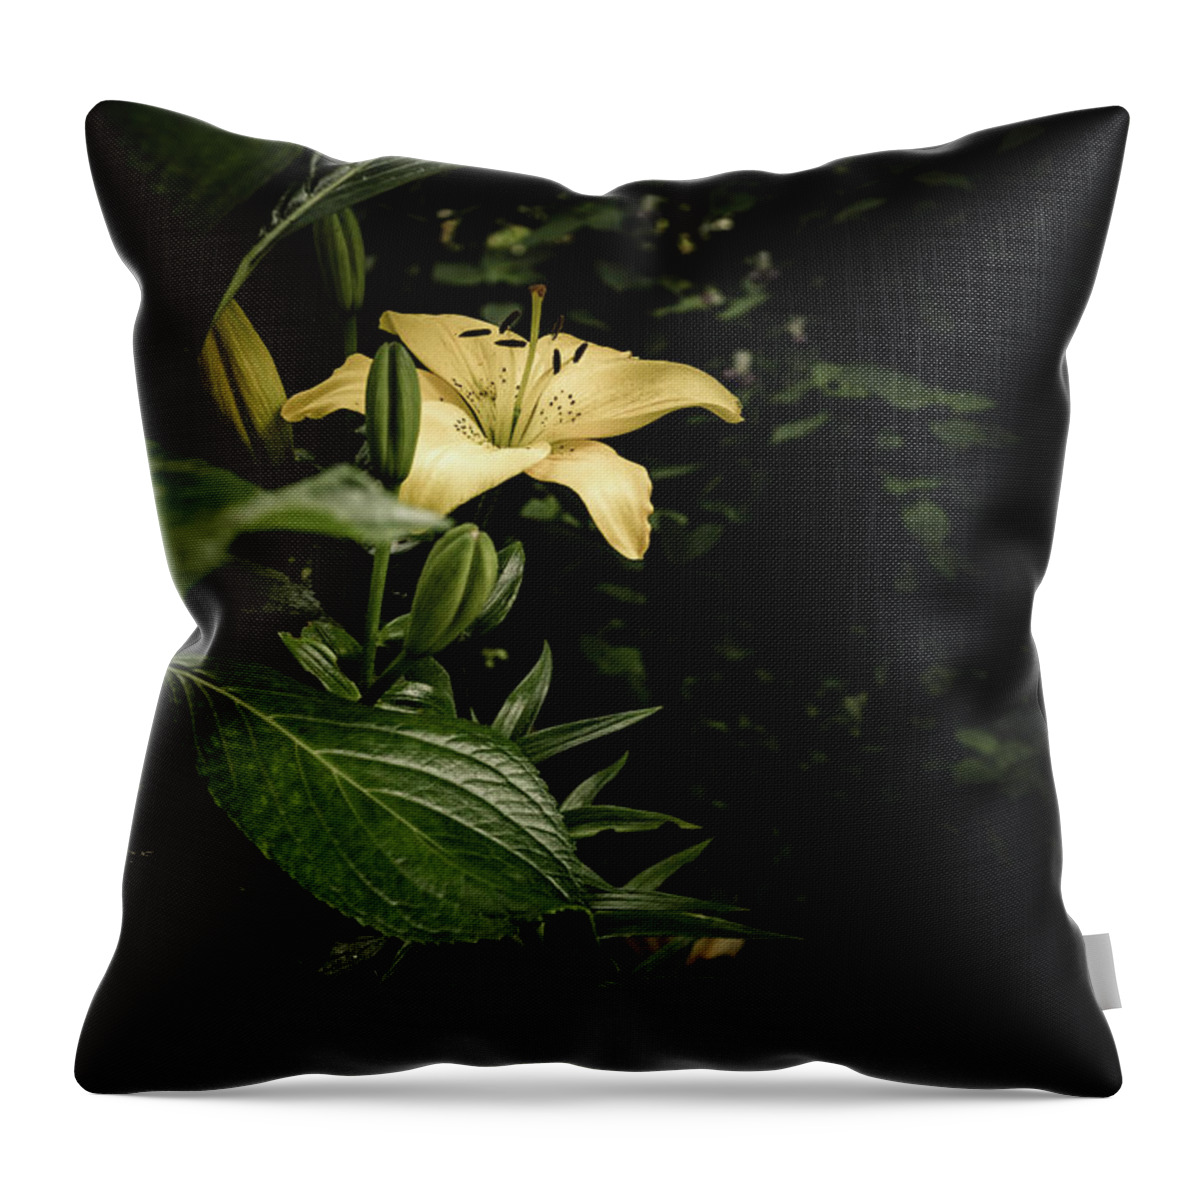 Lilies Throw Pillow featuring the photograph Lily In The Garden Of Shadows by Marco Oliveira